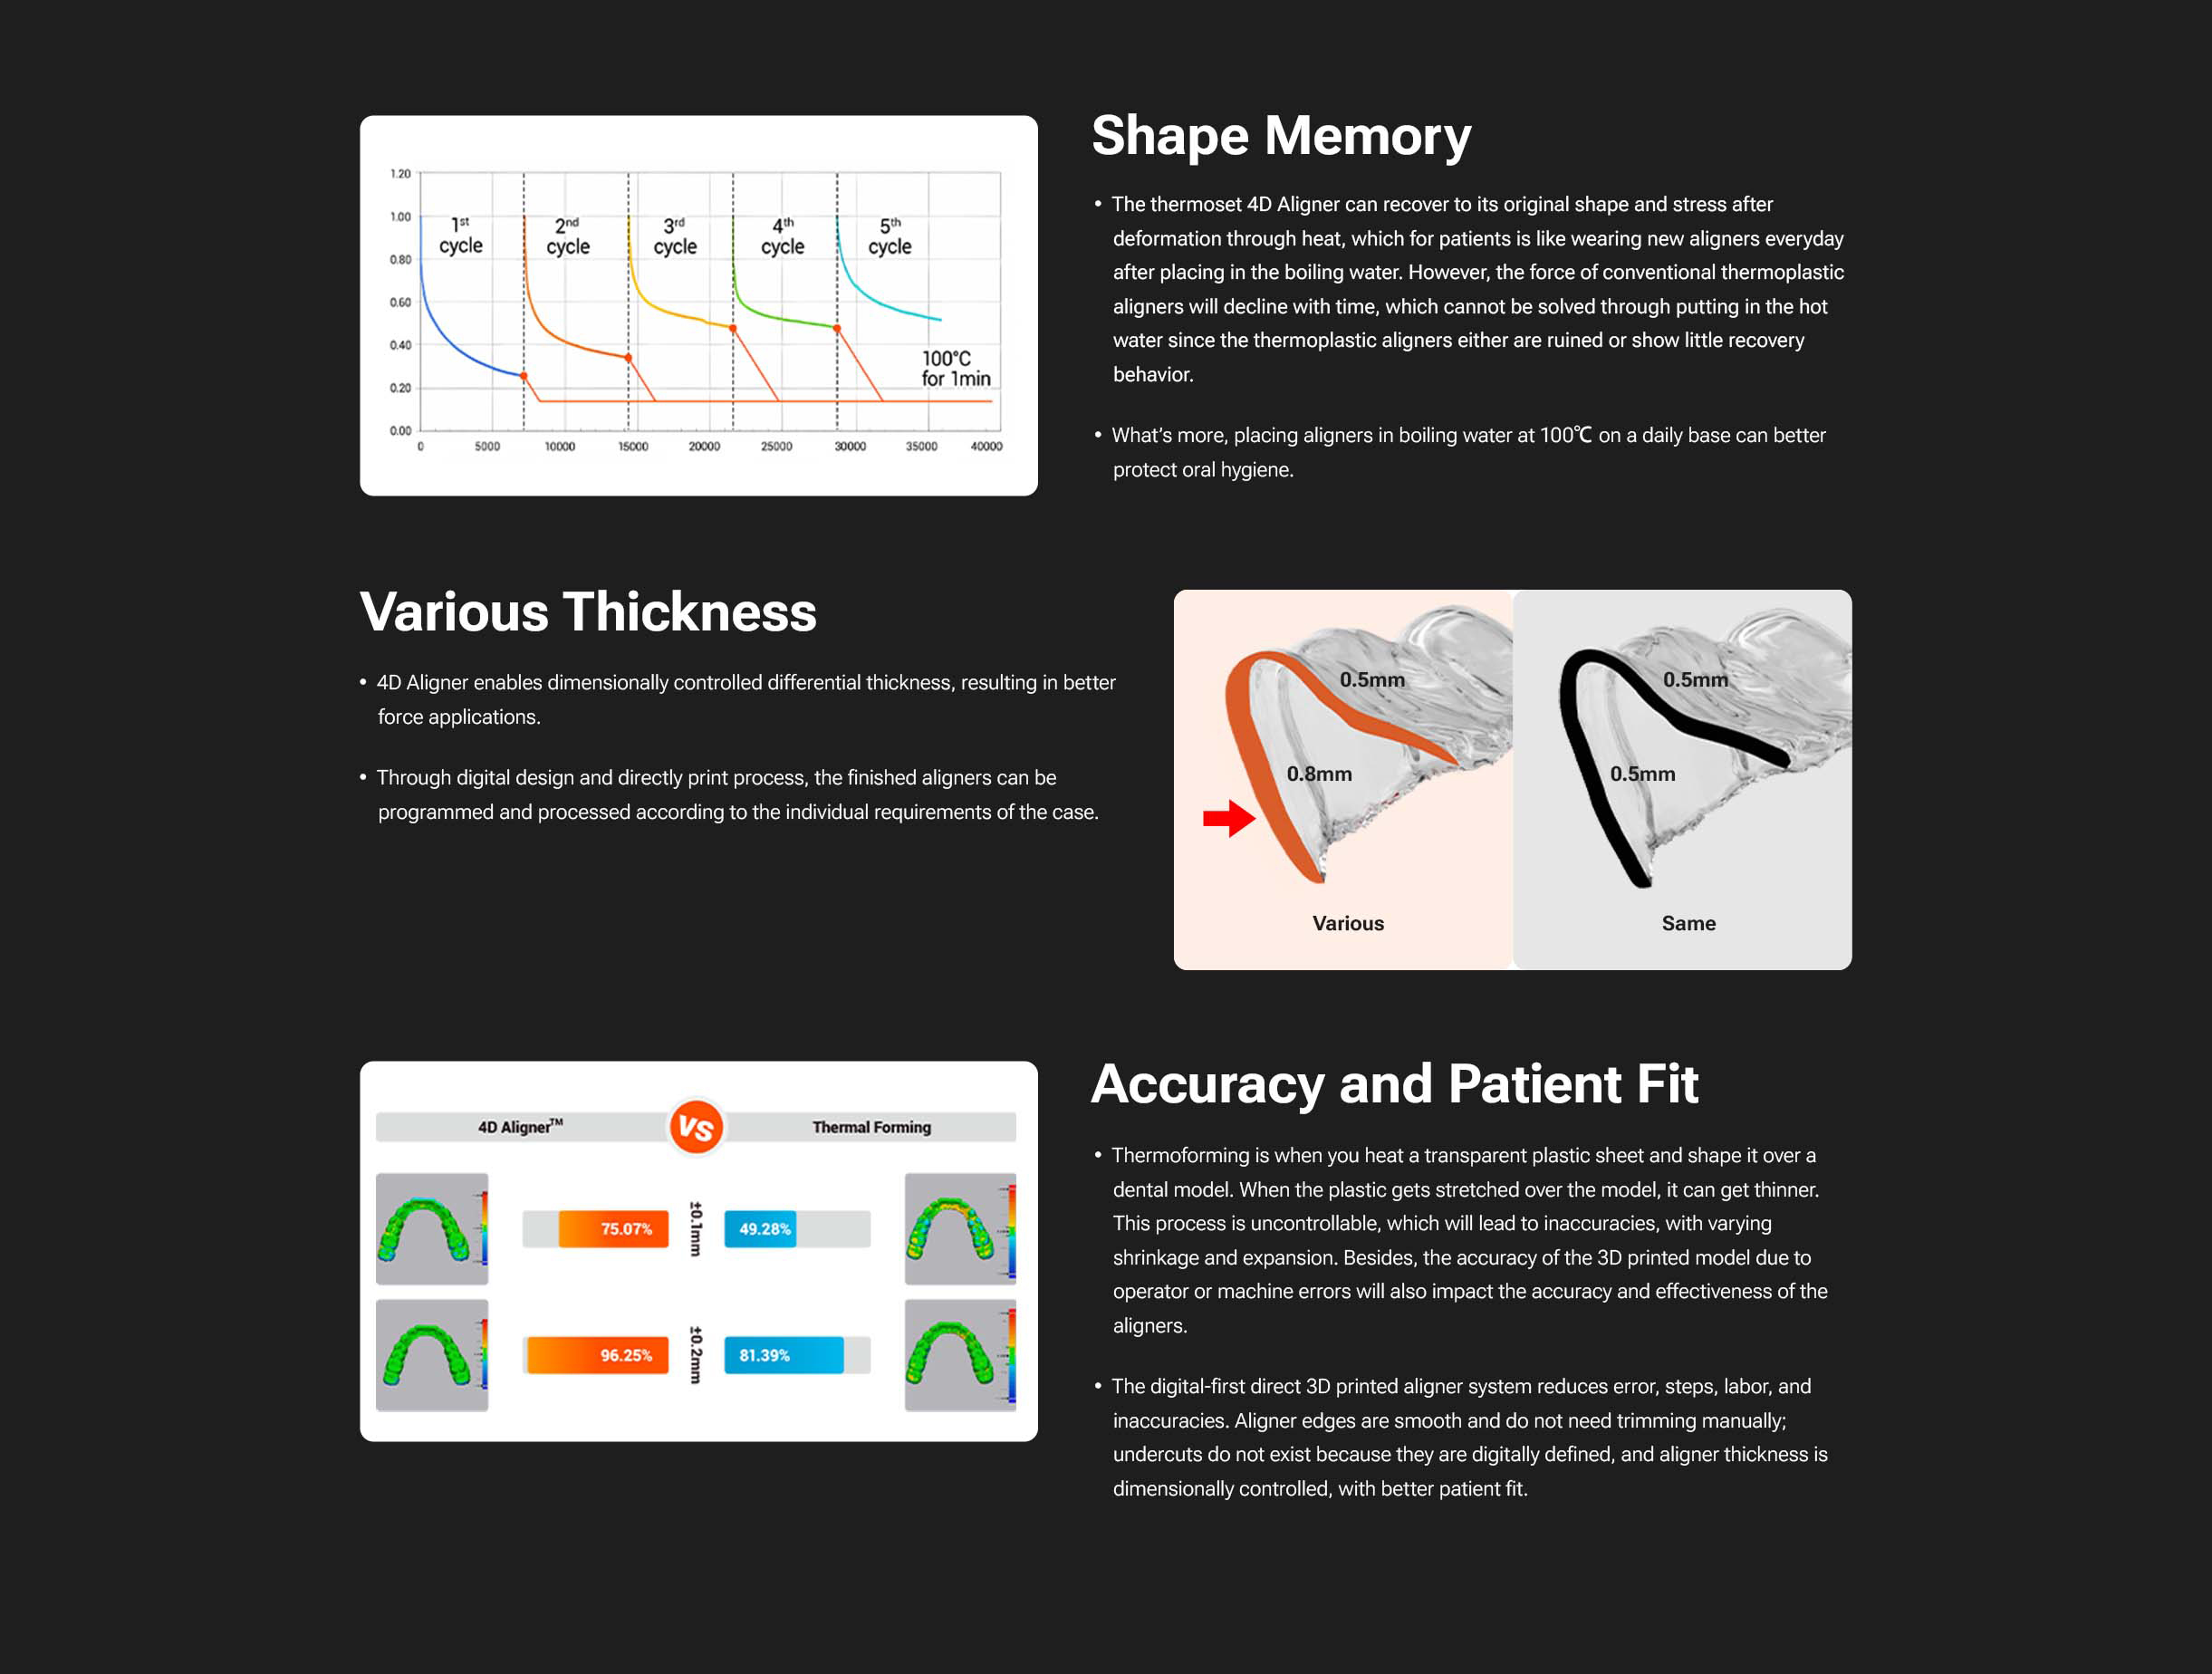 Shape Memory & Various Thickness